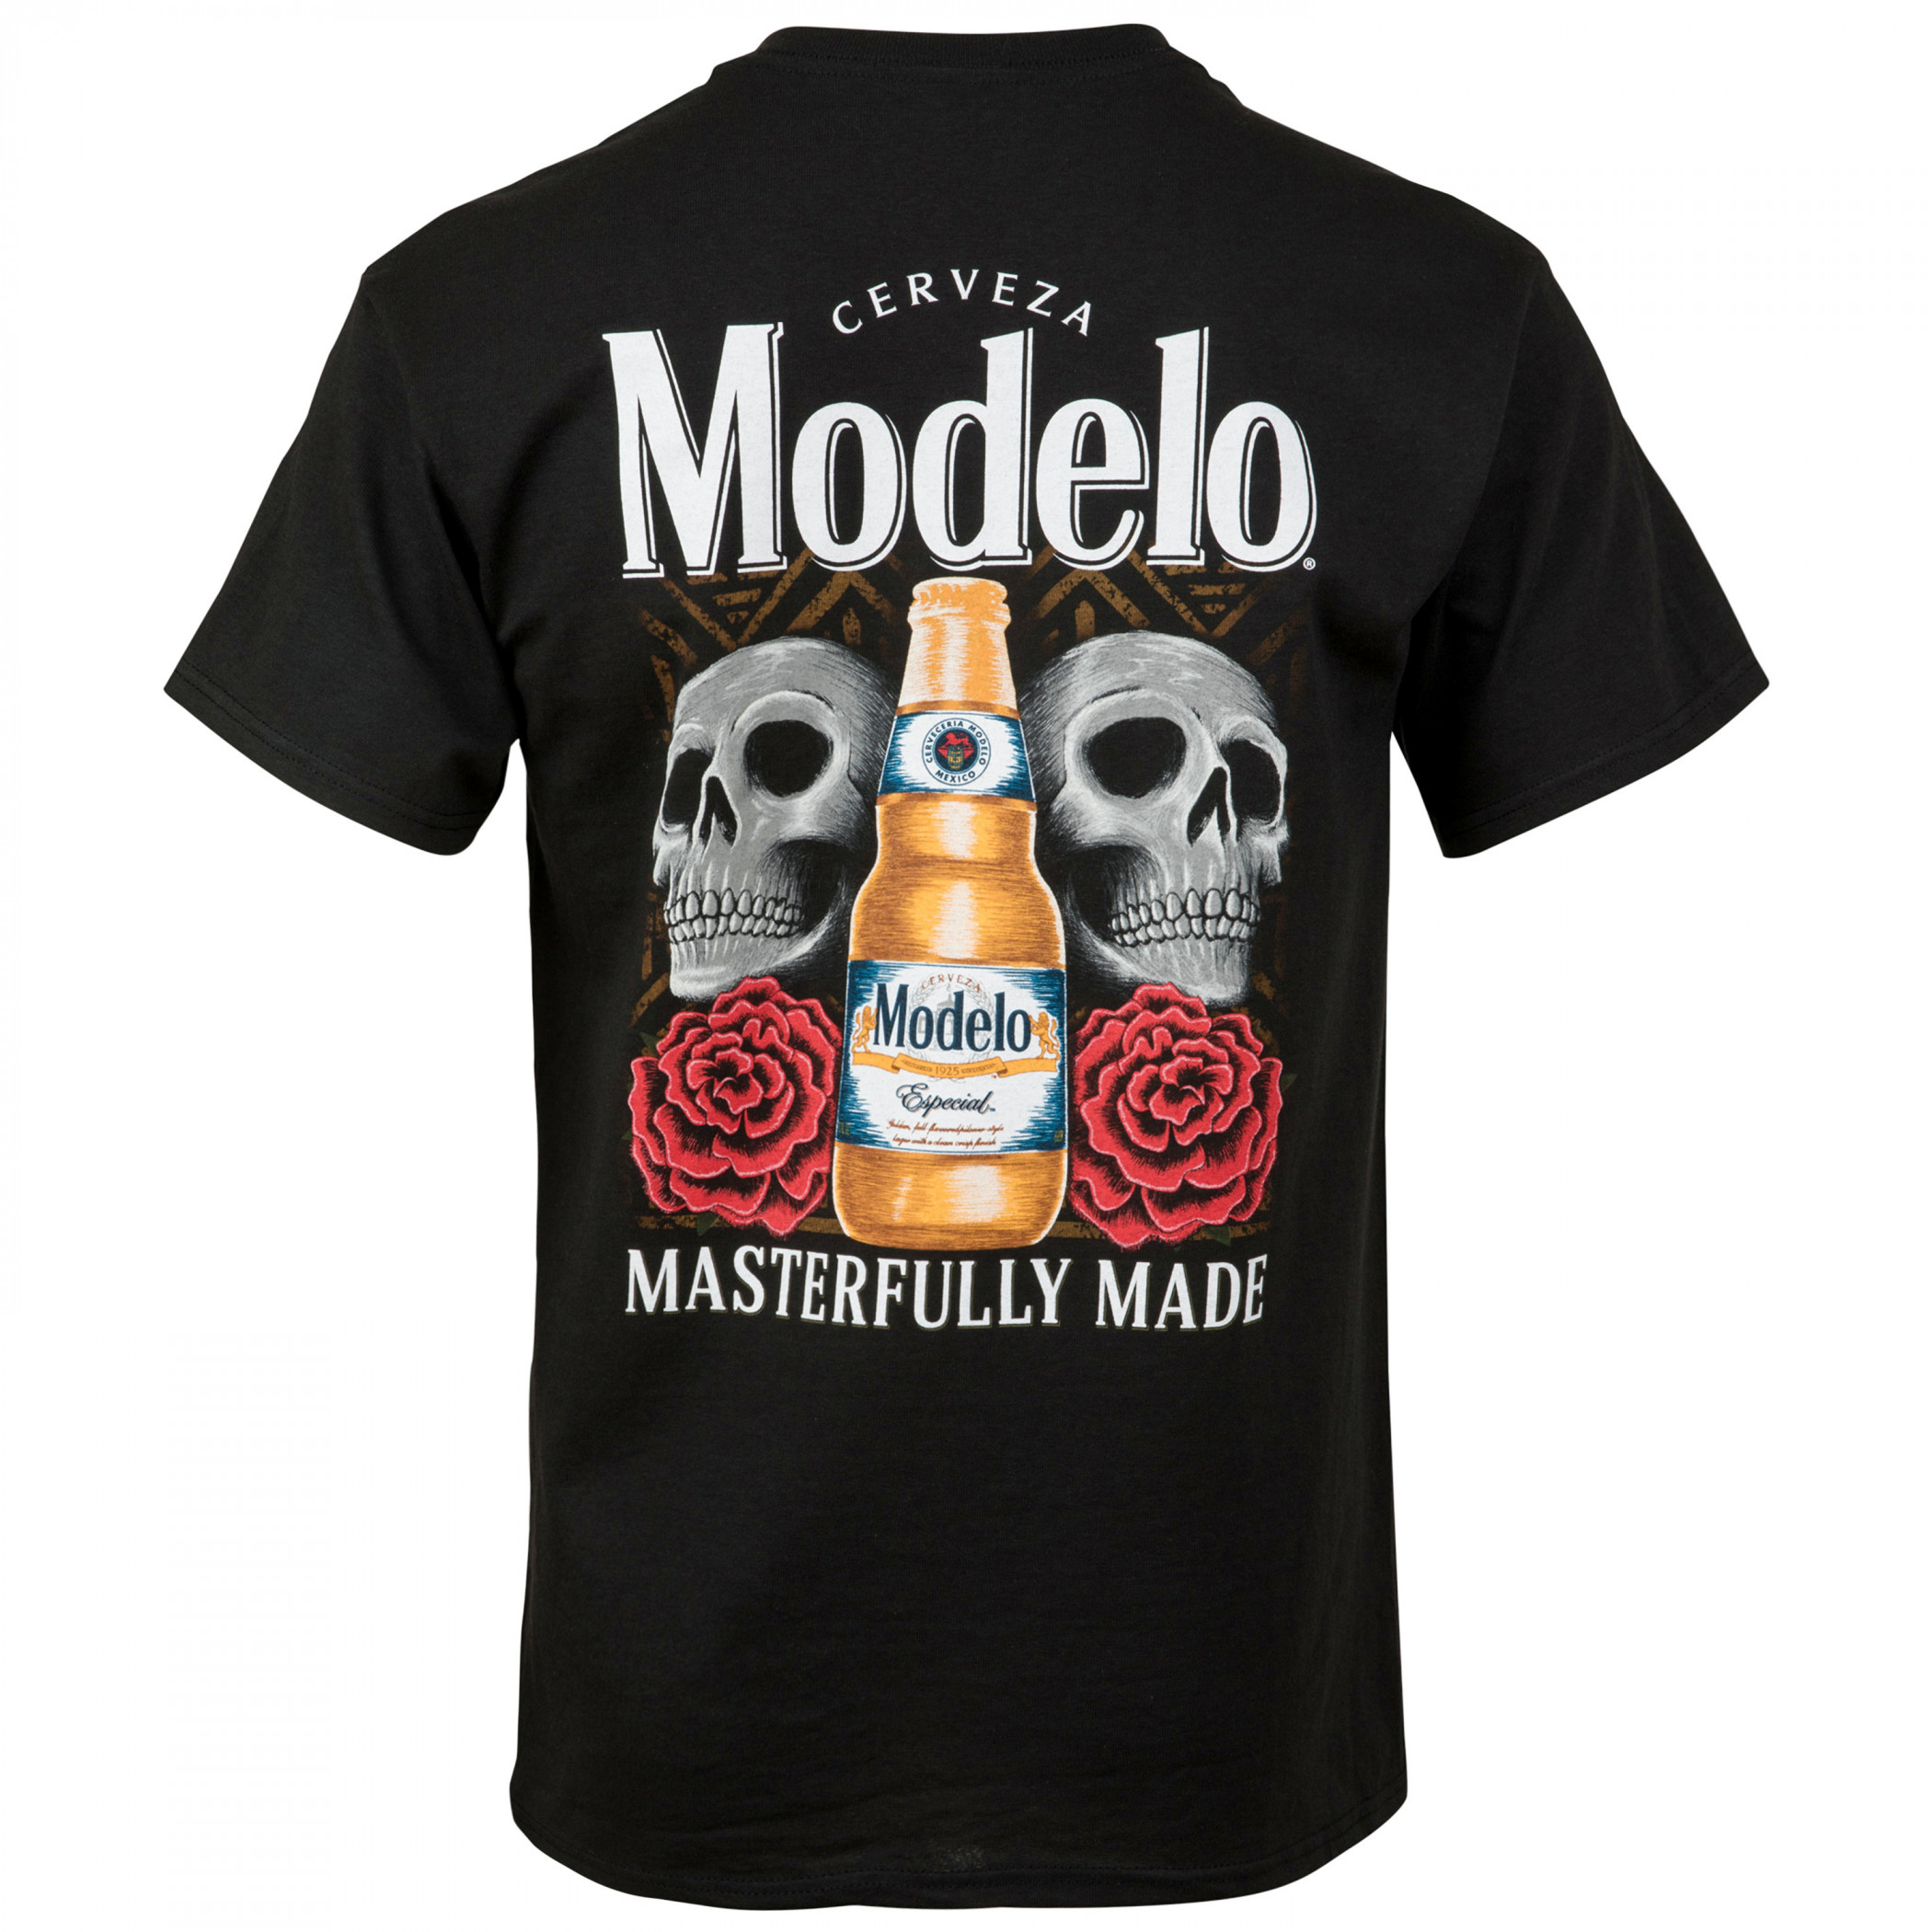 Modelo Especial Skulls and Roses Masterfully Made Front/Back T-Shirt